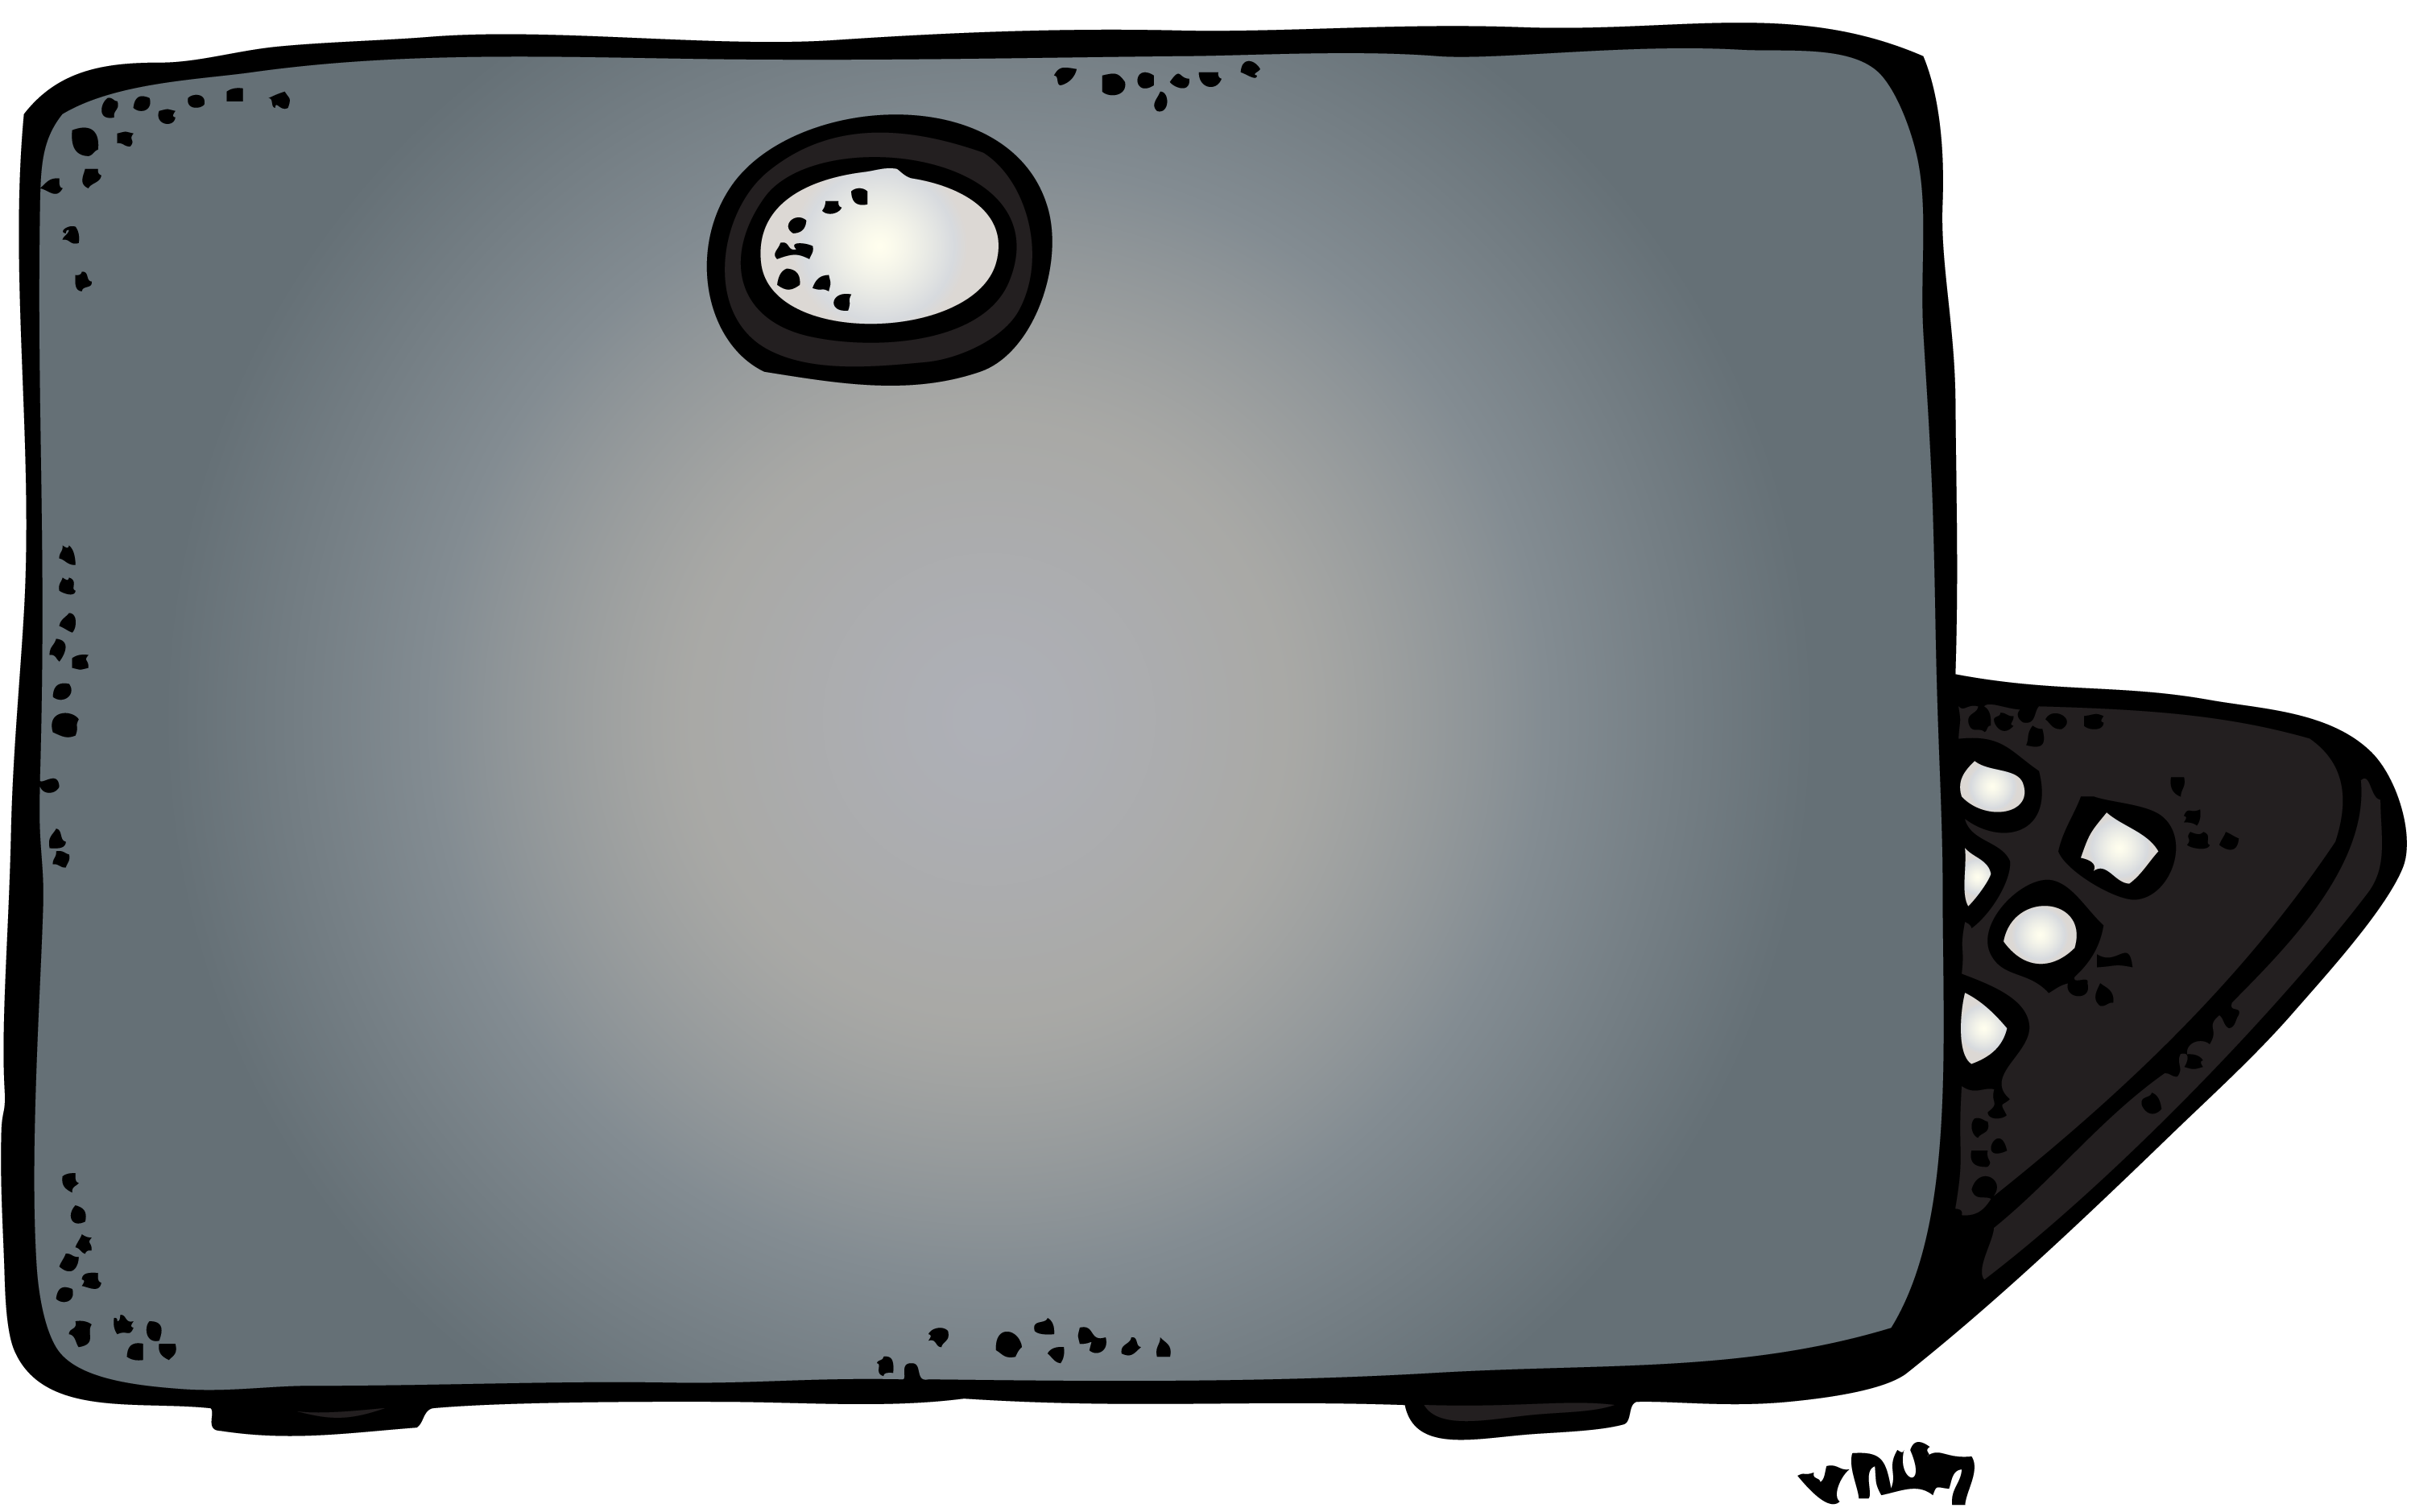 Check out our new. Laptop clipart school laptop